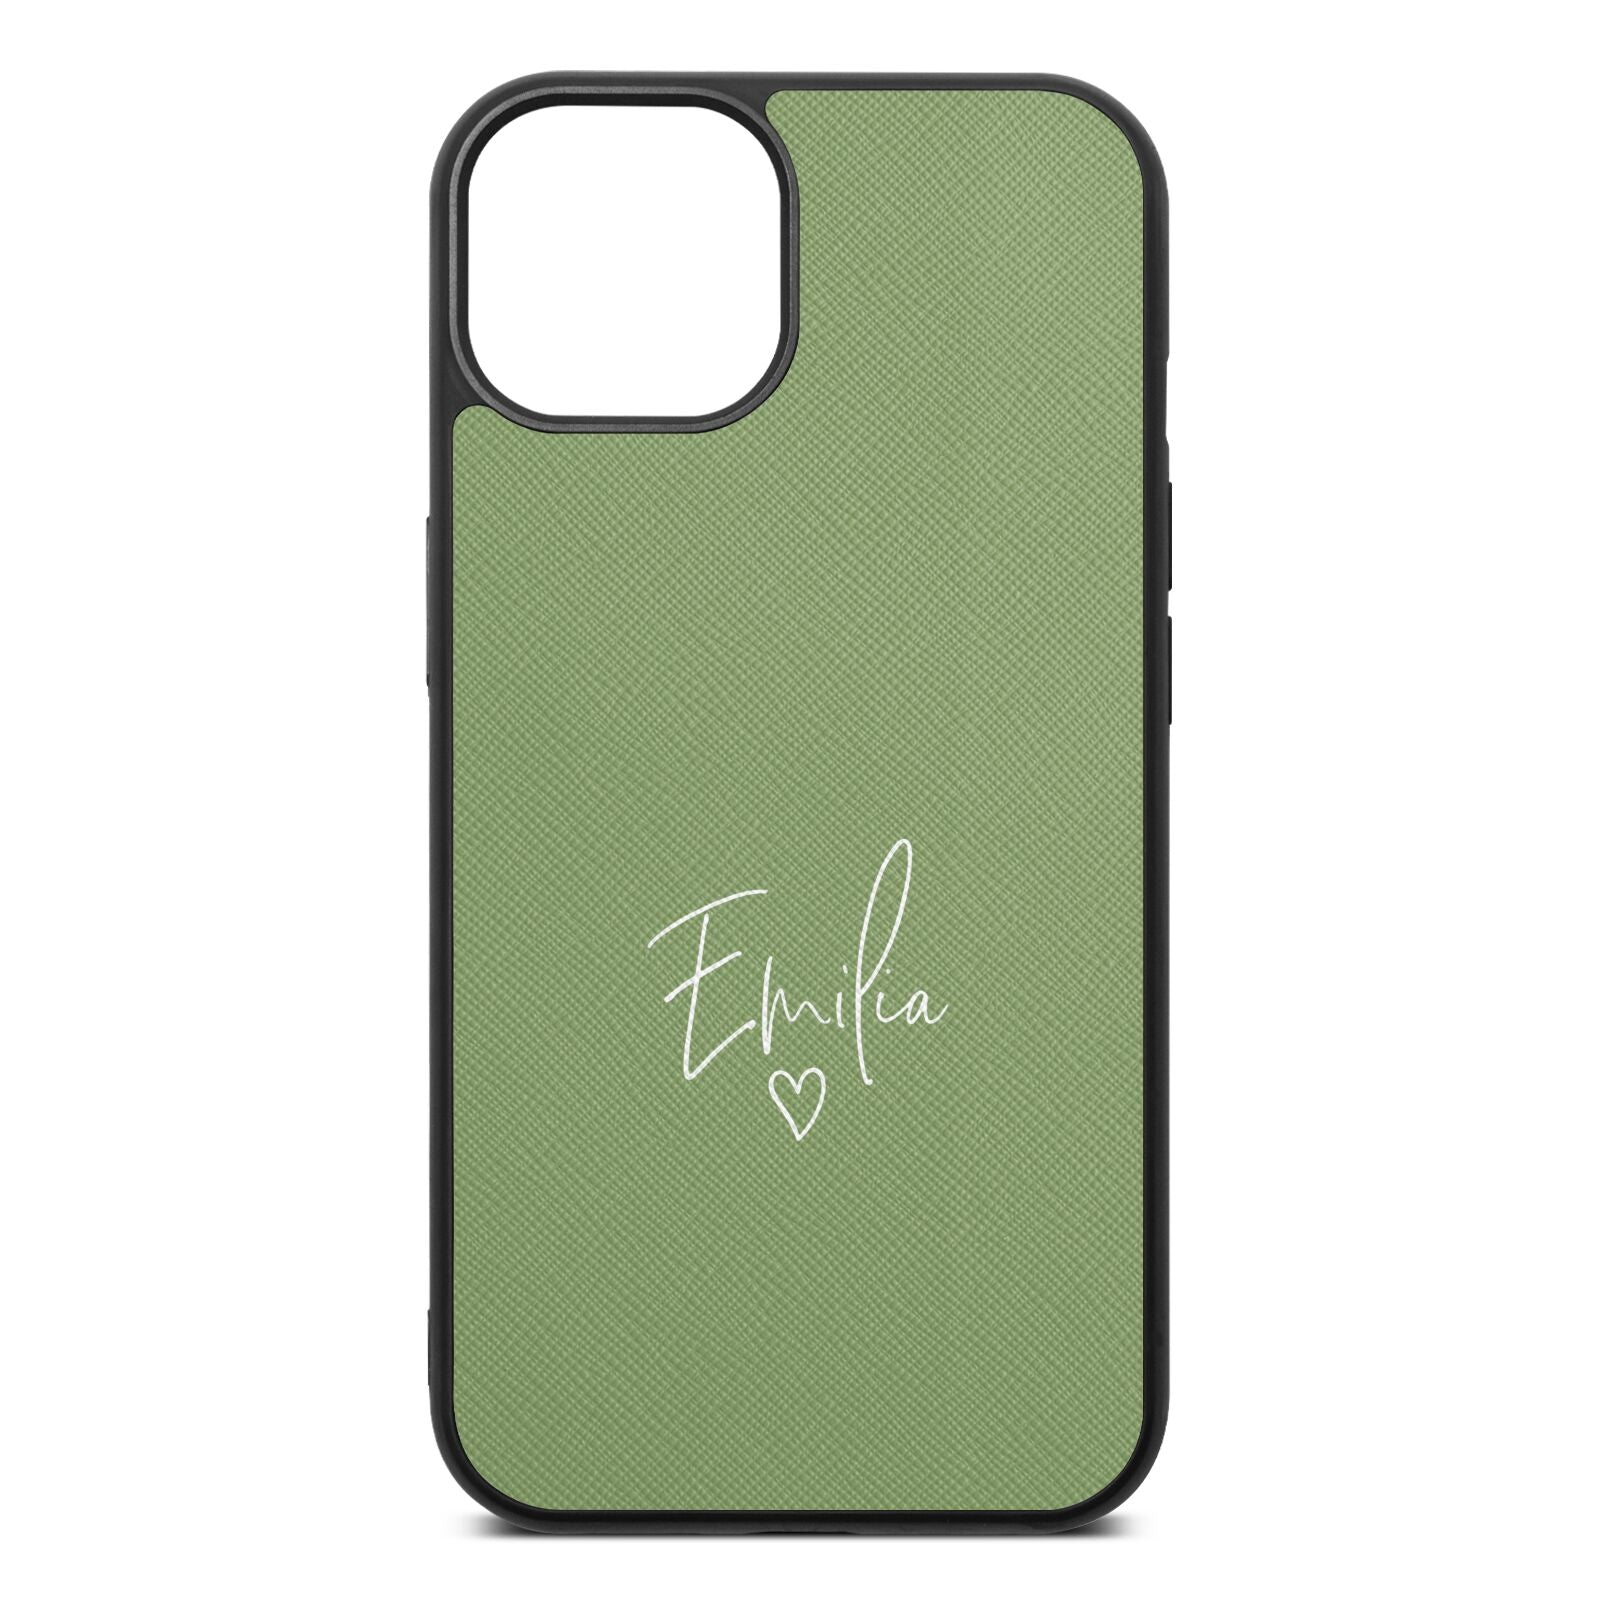 White Handwritten Name Transparent Lime Saffiano Leather iPhone 13 Case